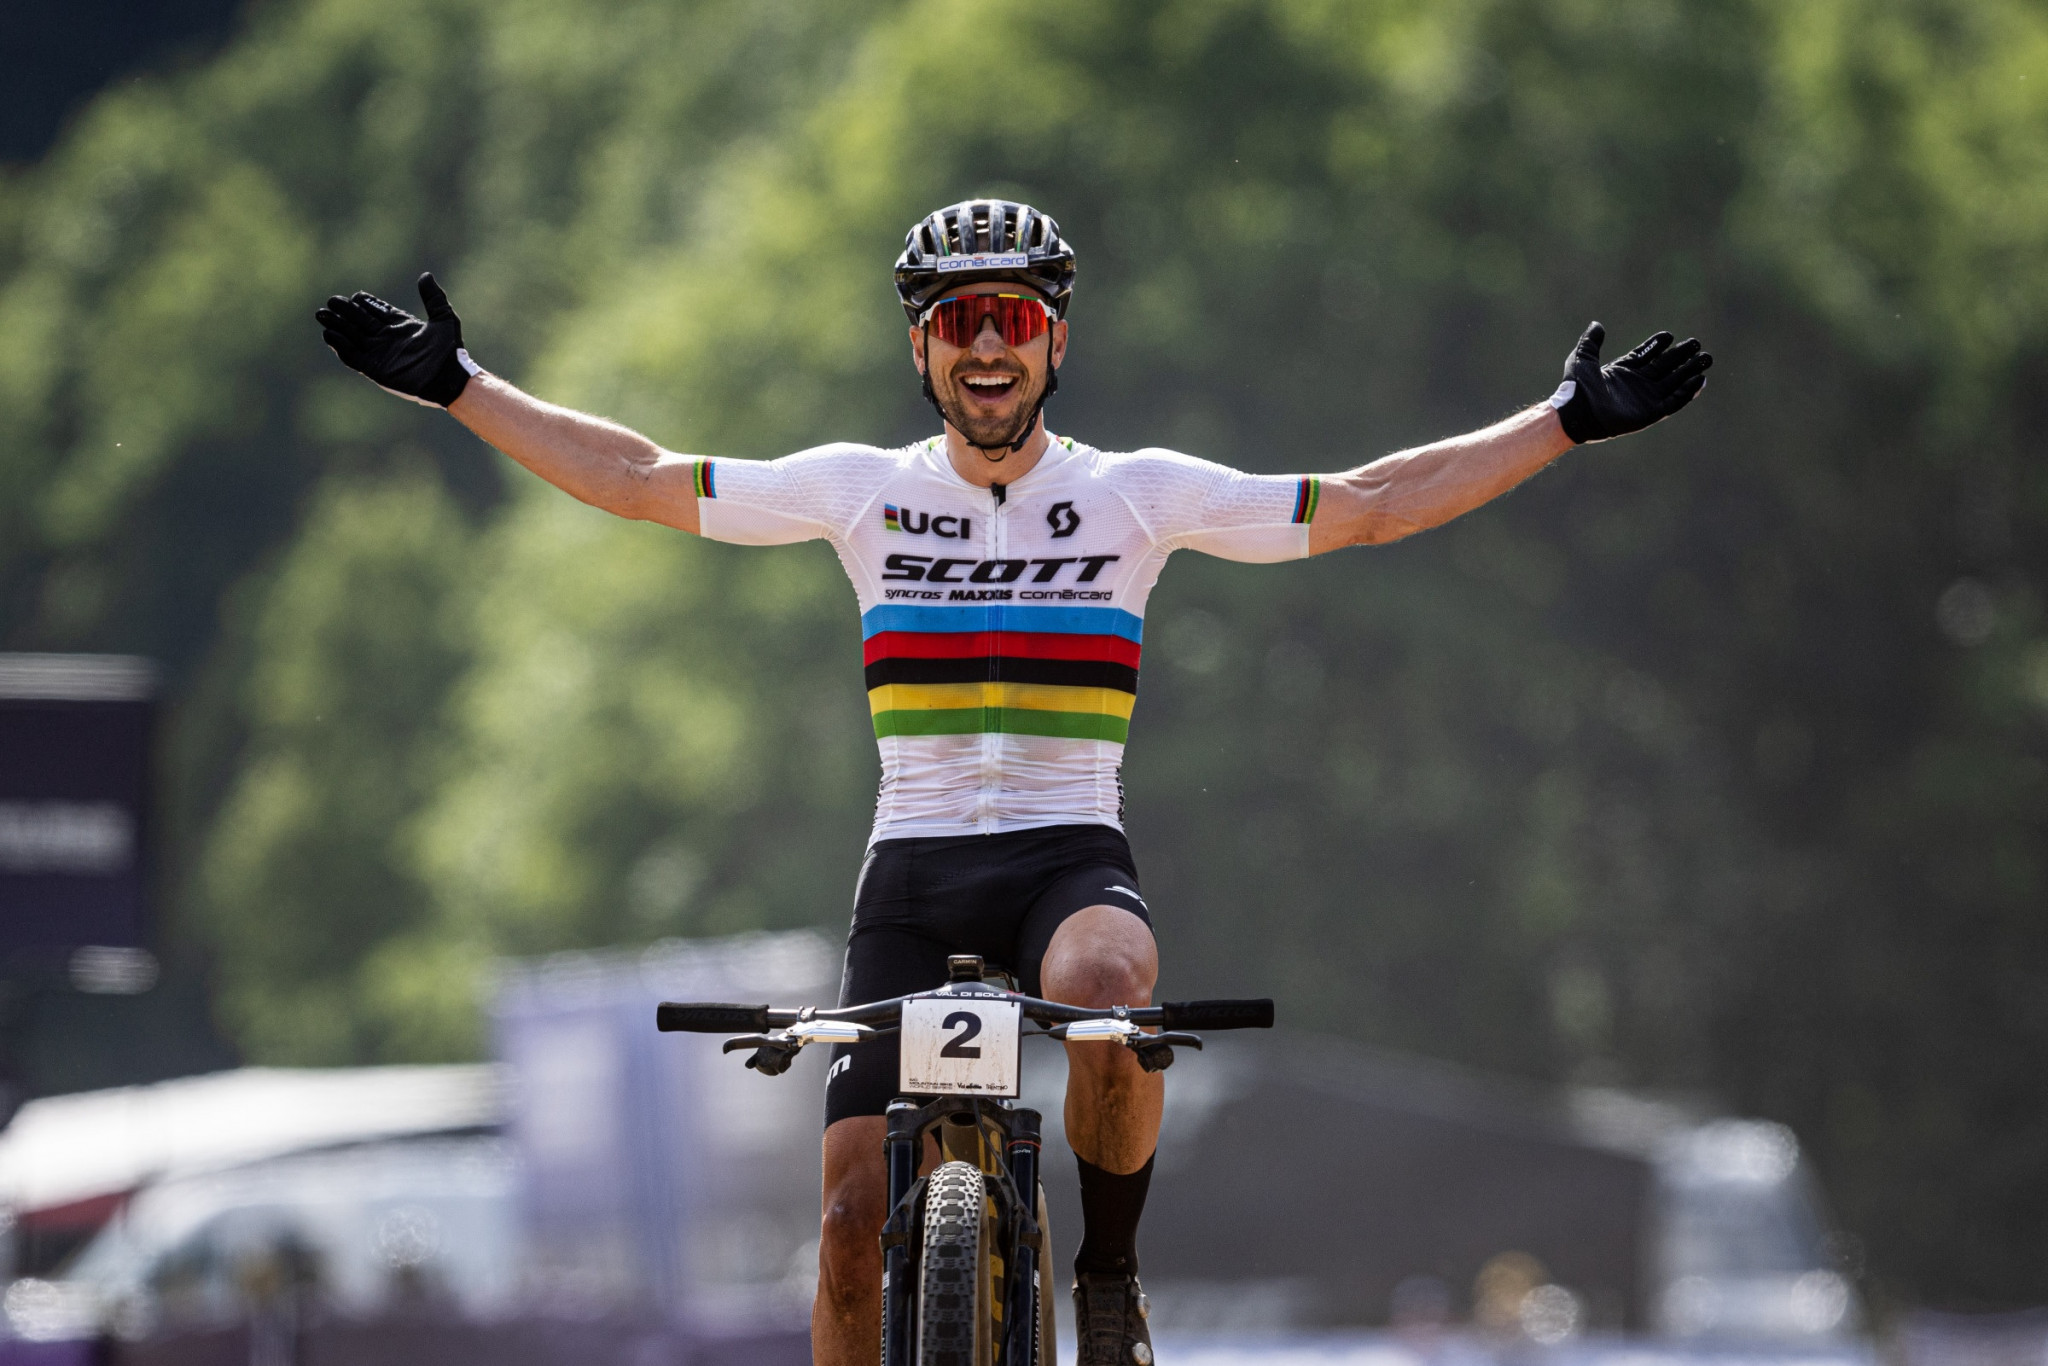 Schurter wins another cross-country gold at Val di Sole UCI Mountain Bike Series